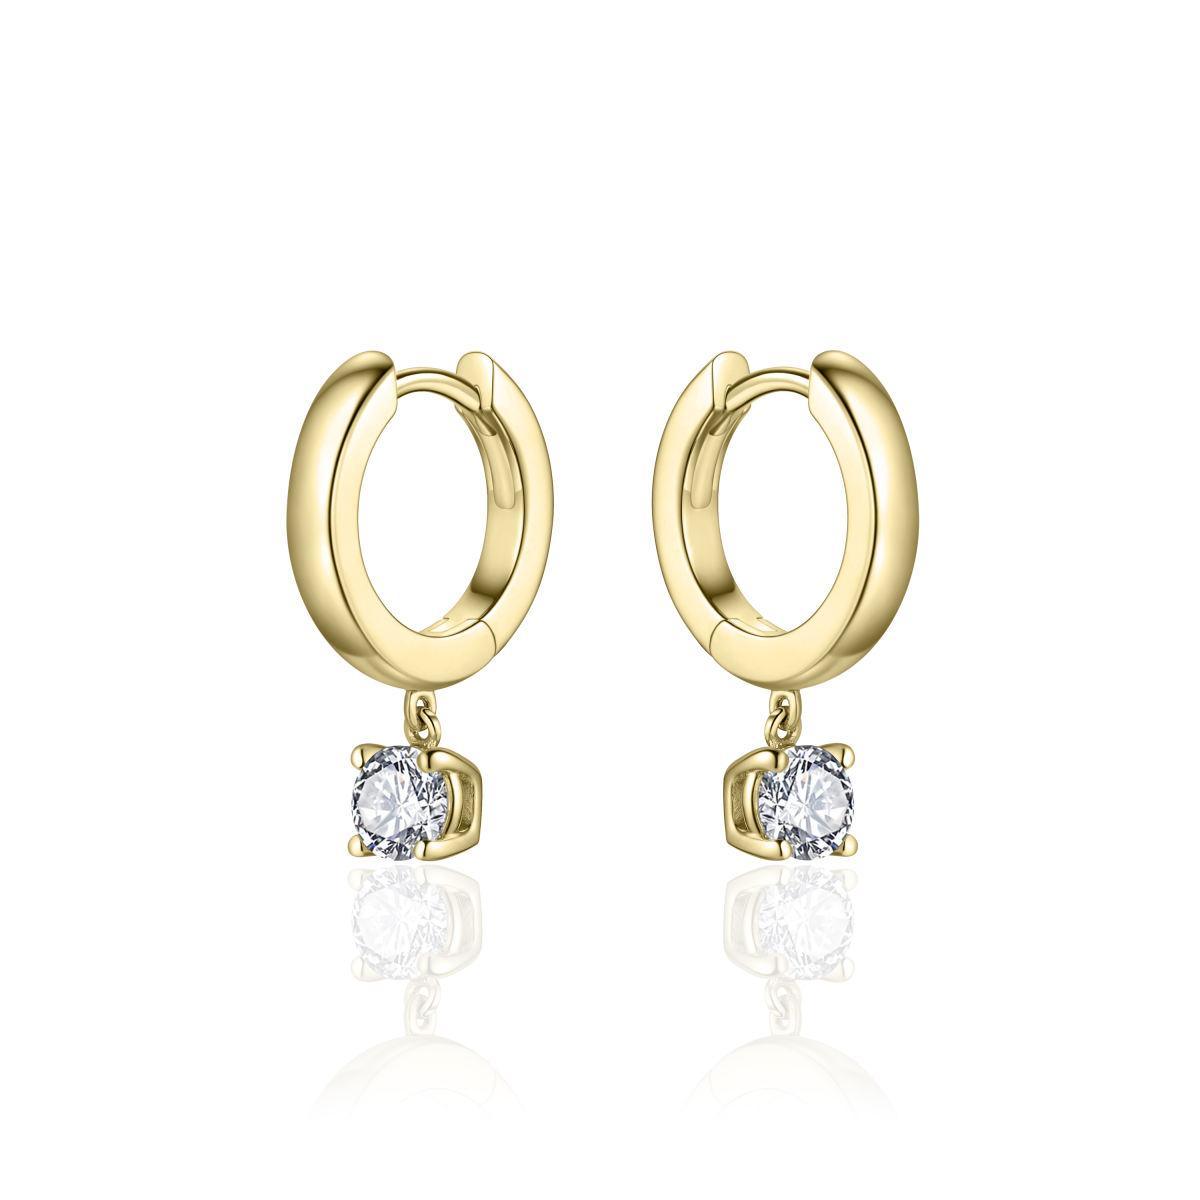 Gold Hoop Earrings with a Cubic Zirconia Charm - Rococo Jewellery